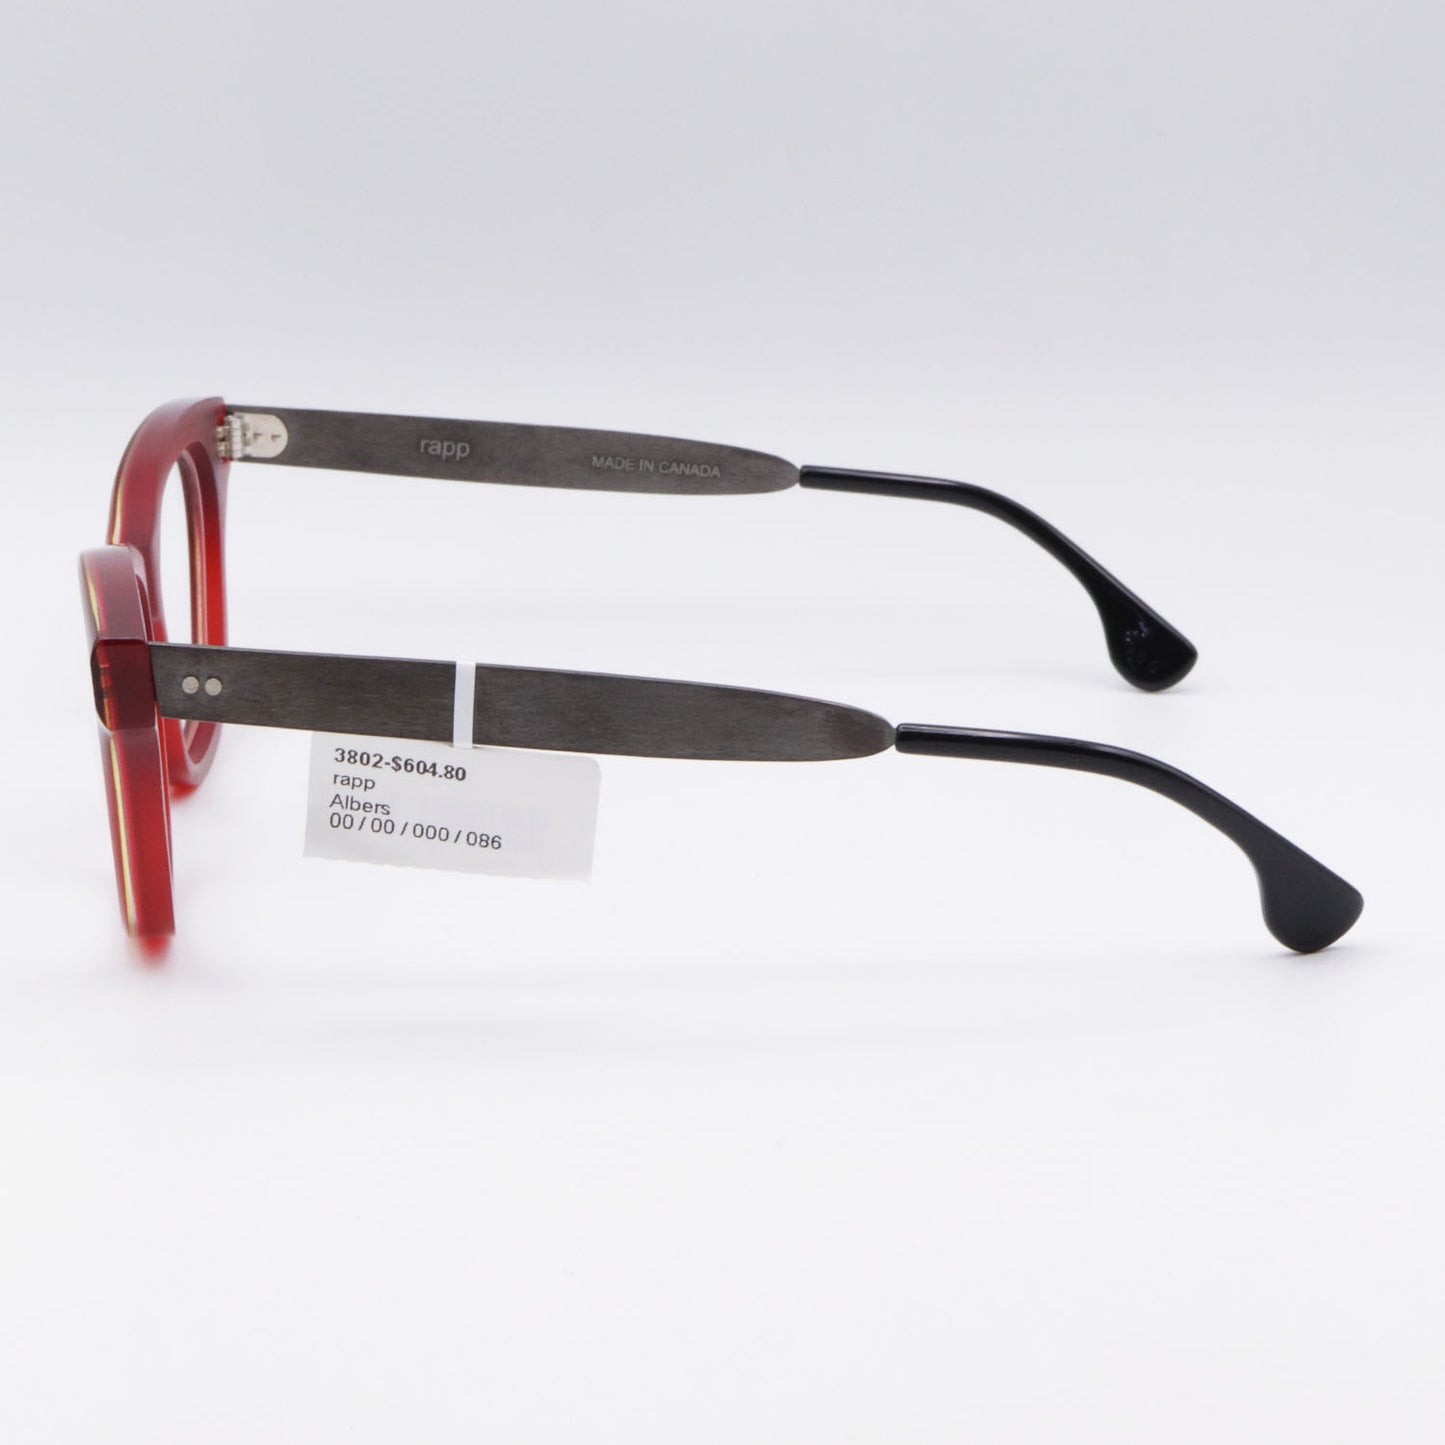 Albers Rapp Frames Glasses Red and Black Matte